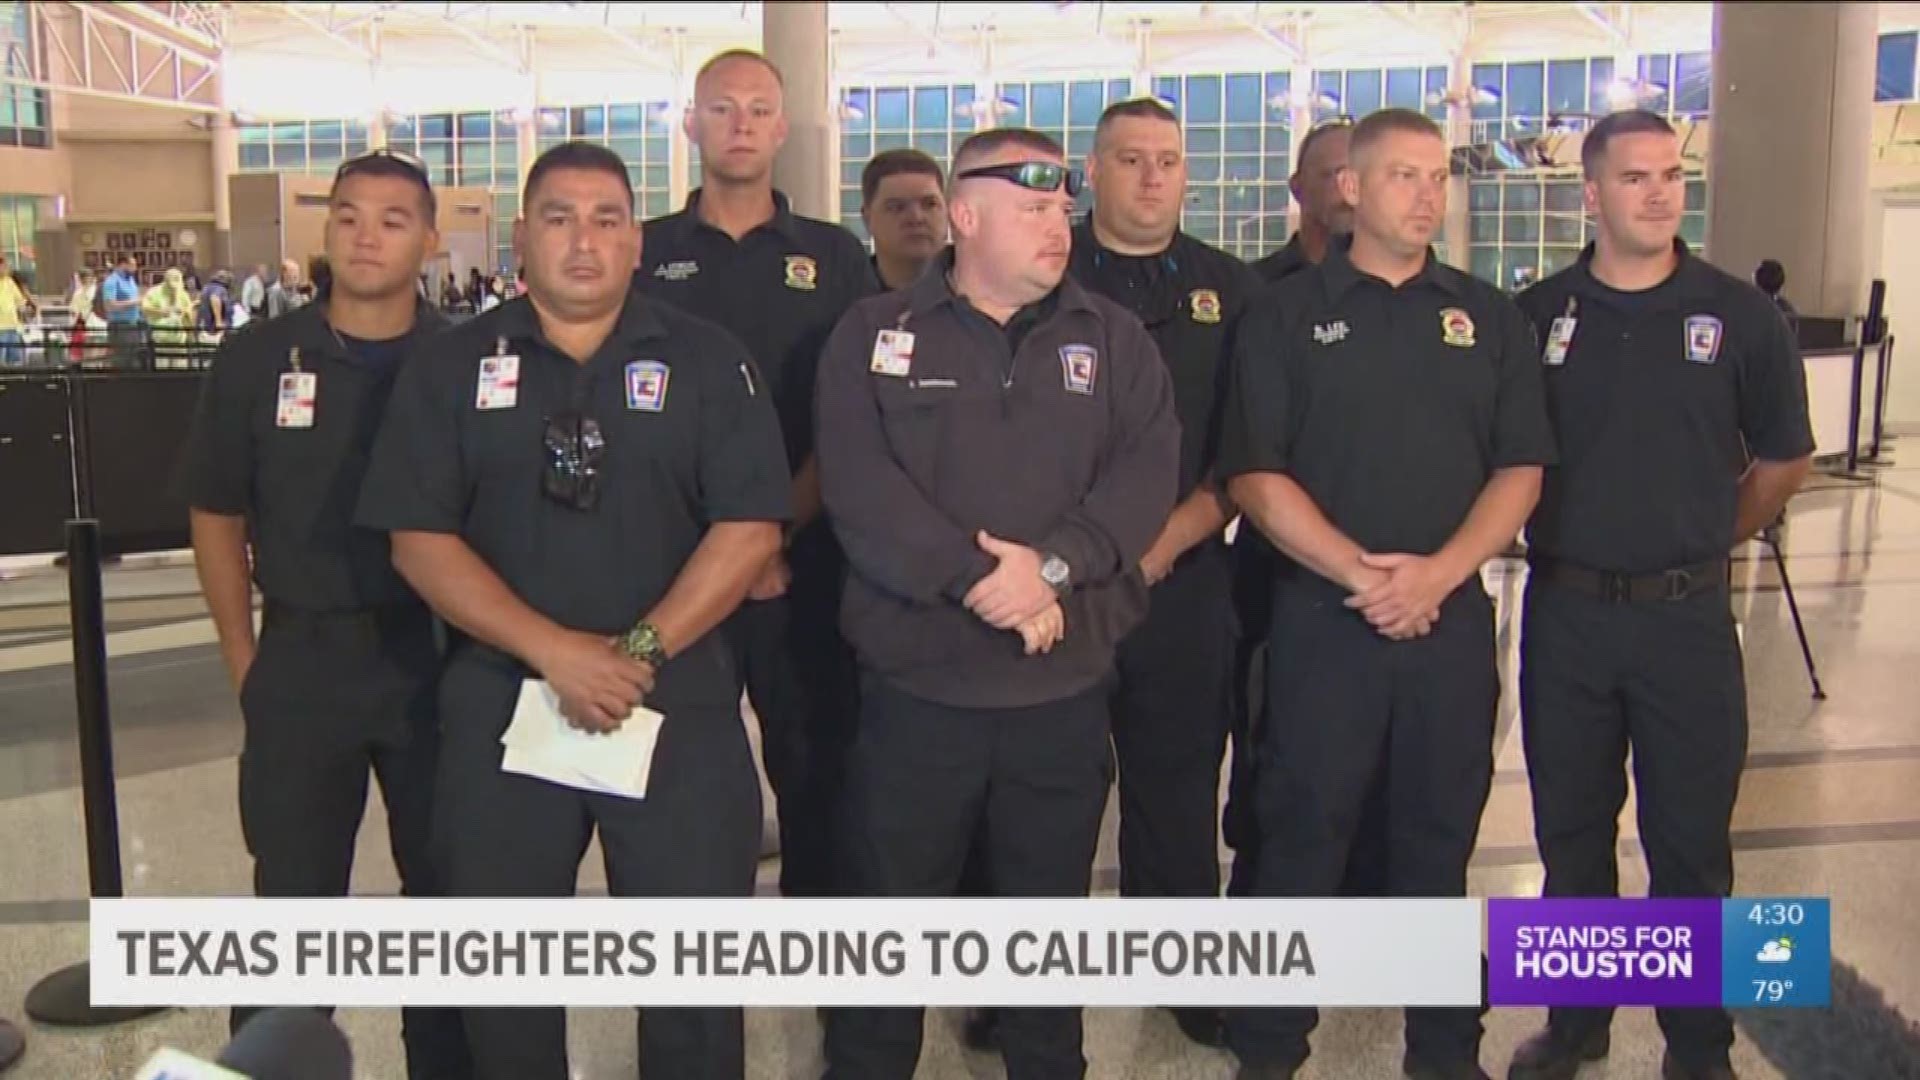 Firefighters from the Houston area are heading to California to help crews battle the raging wildfires there.